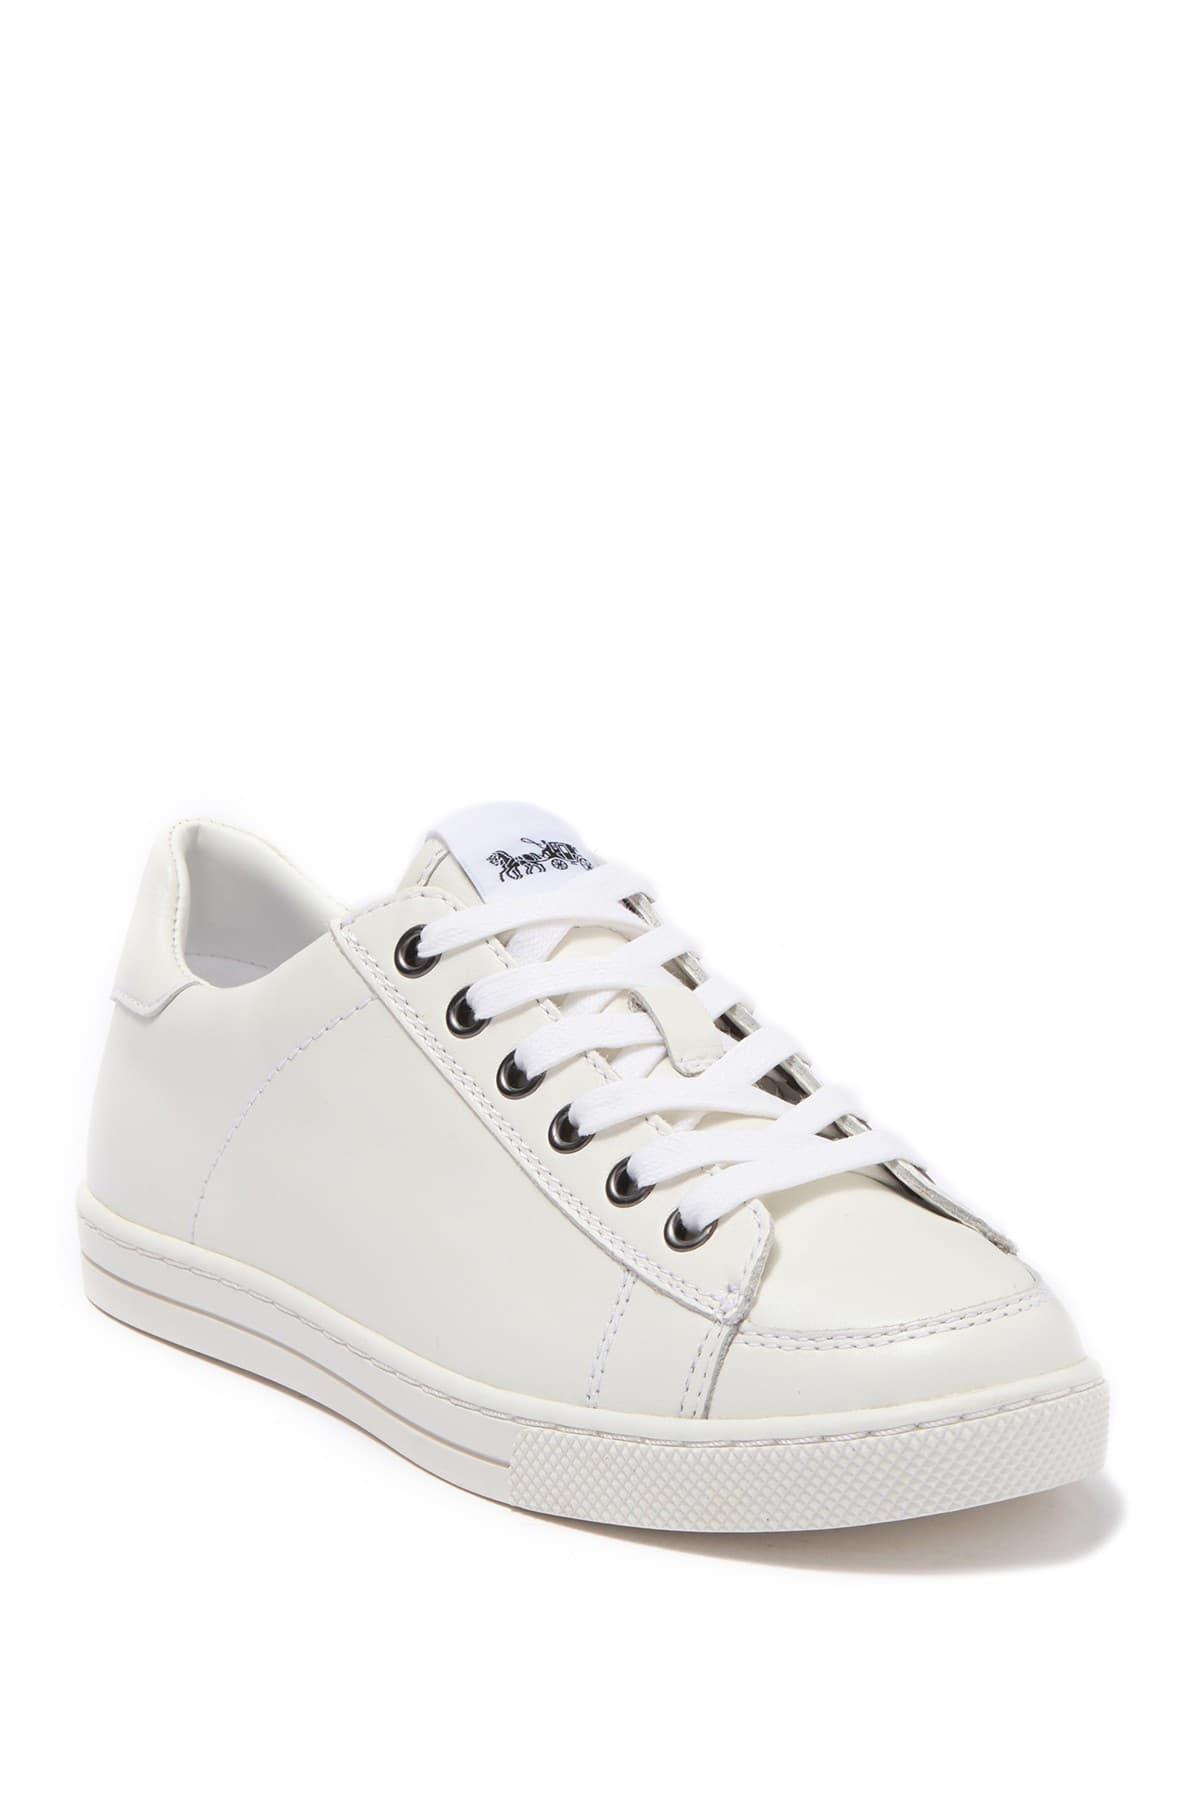 Coach Women's Lowline Leather Cupsole Trainers - Optic White/Midnight Navy  | Trainers, Leather, White sneaker